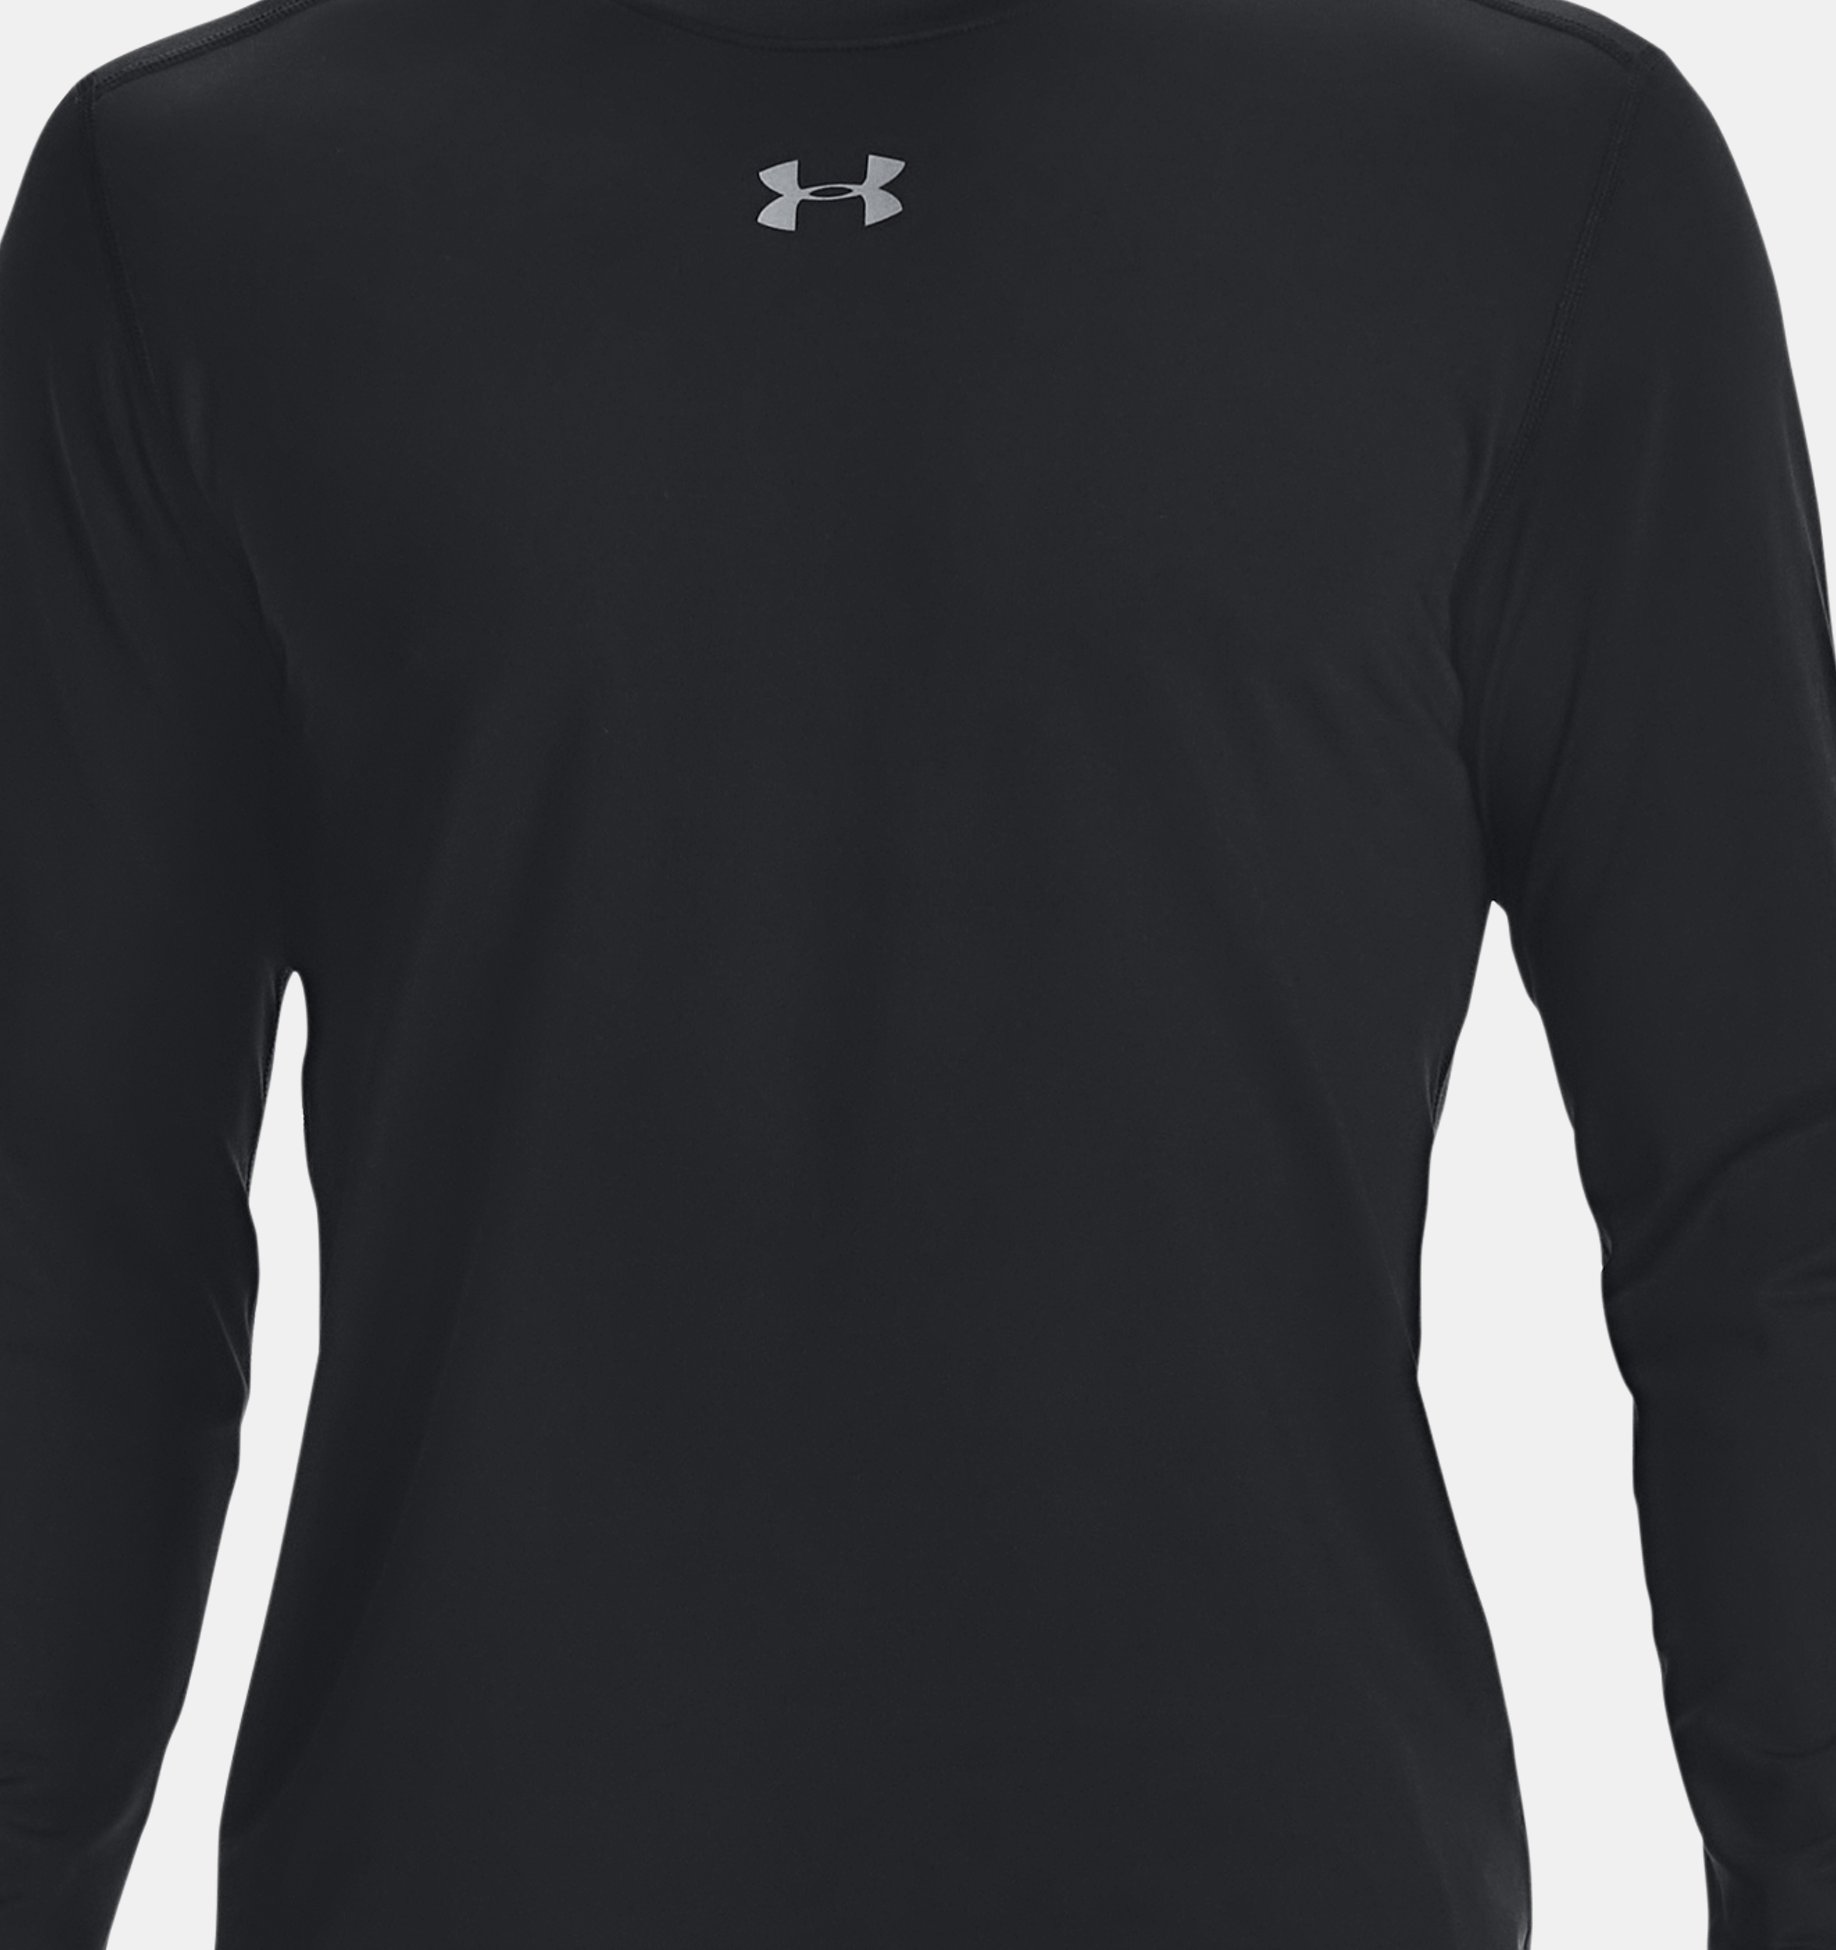 Men's ColdGear® Armour Fitted Crew | Under Armour